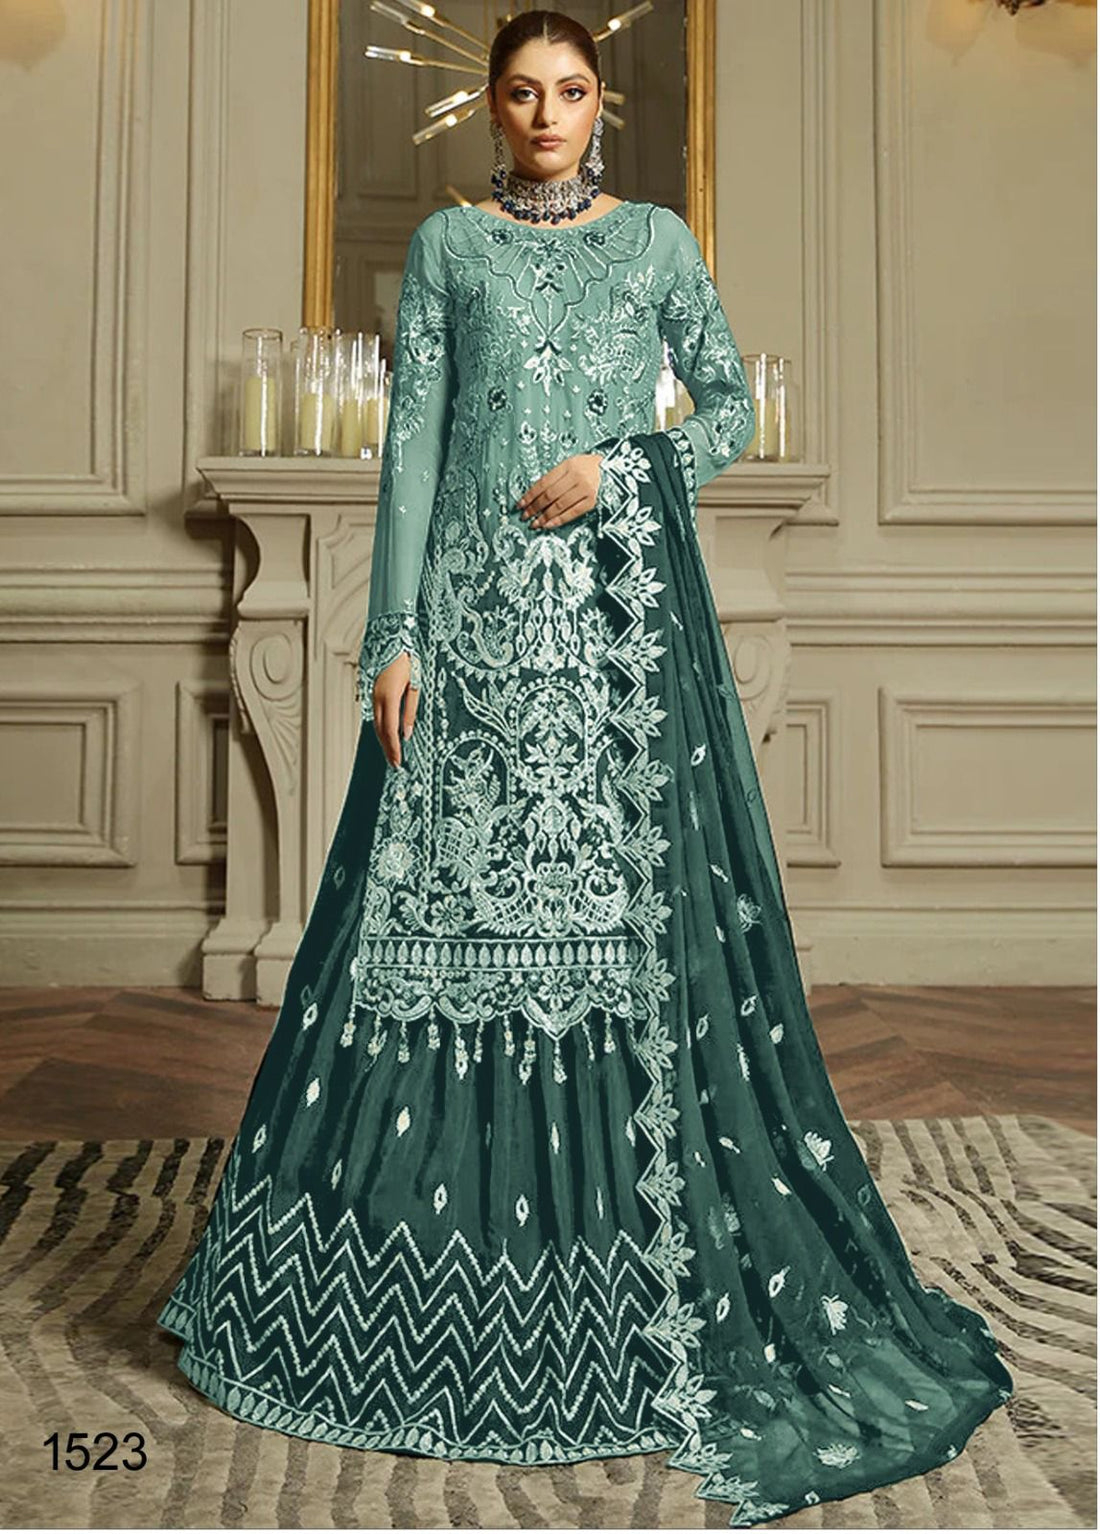 NAZNEEN SUSHMA 1521 SERIES DESIGNER SUIT Anant Tex Exports Private Limited